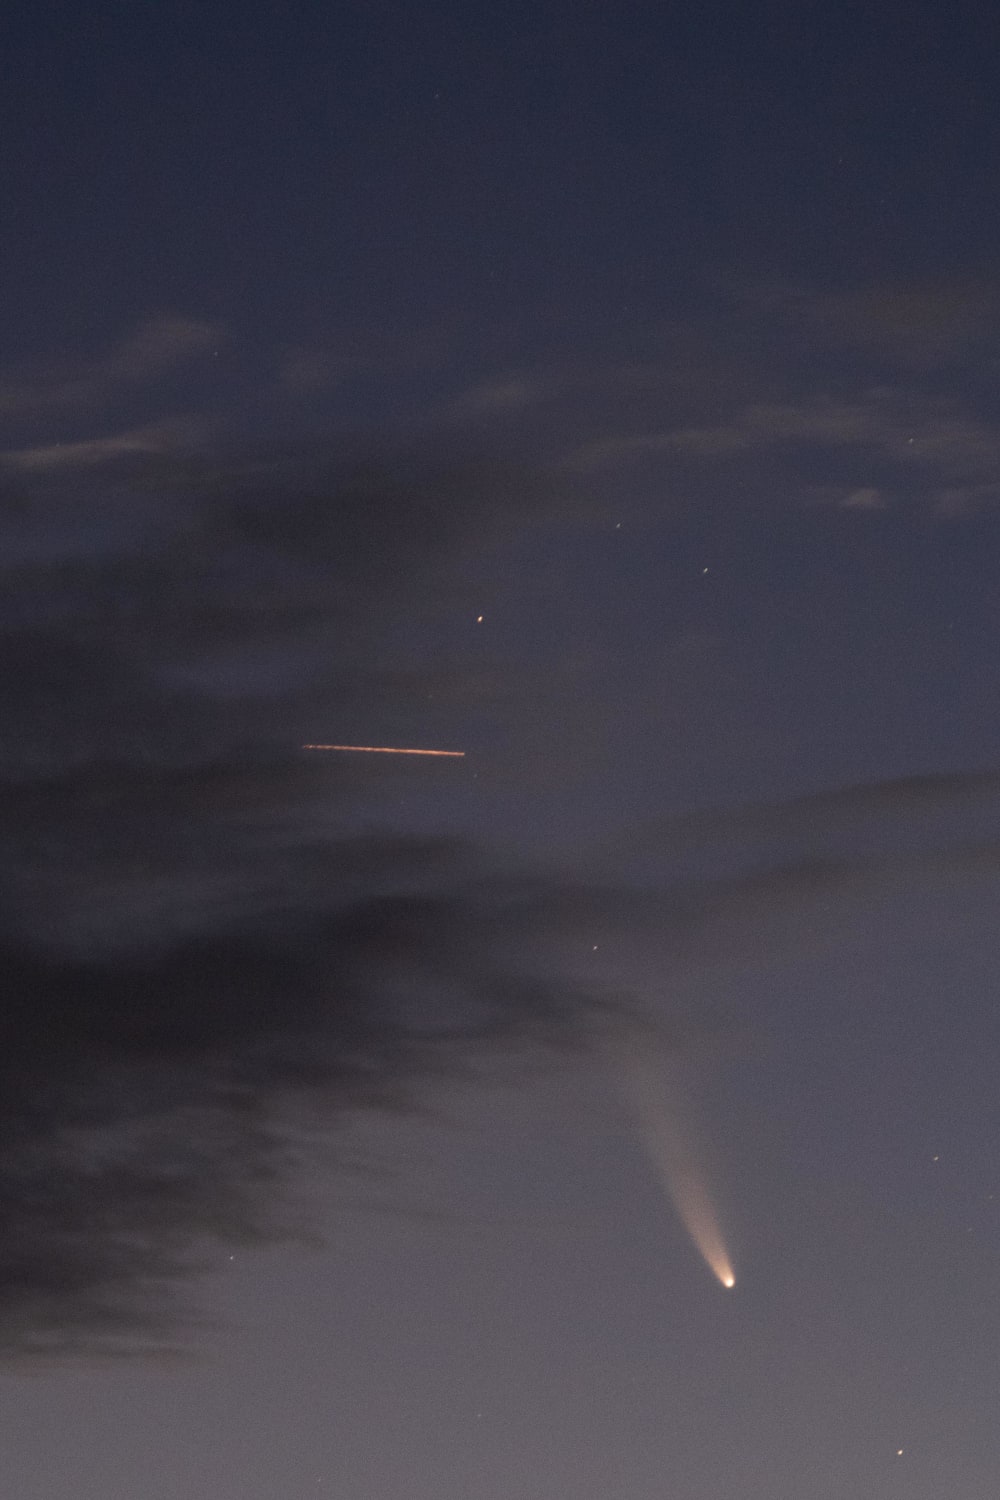 Another ISS crossing in front of NEOWISE photo